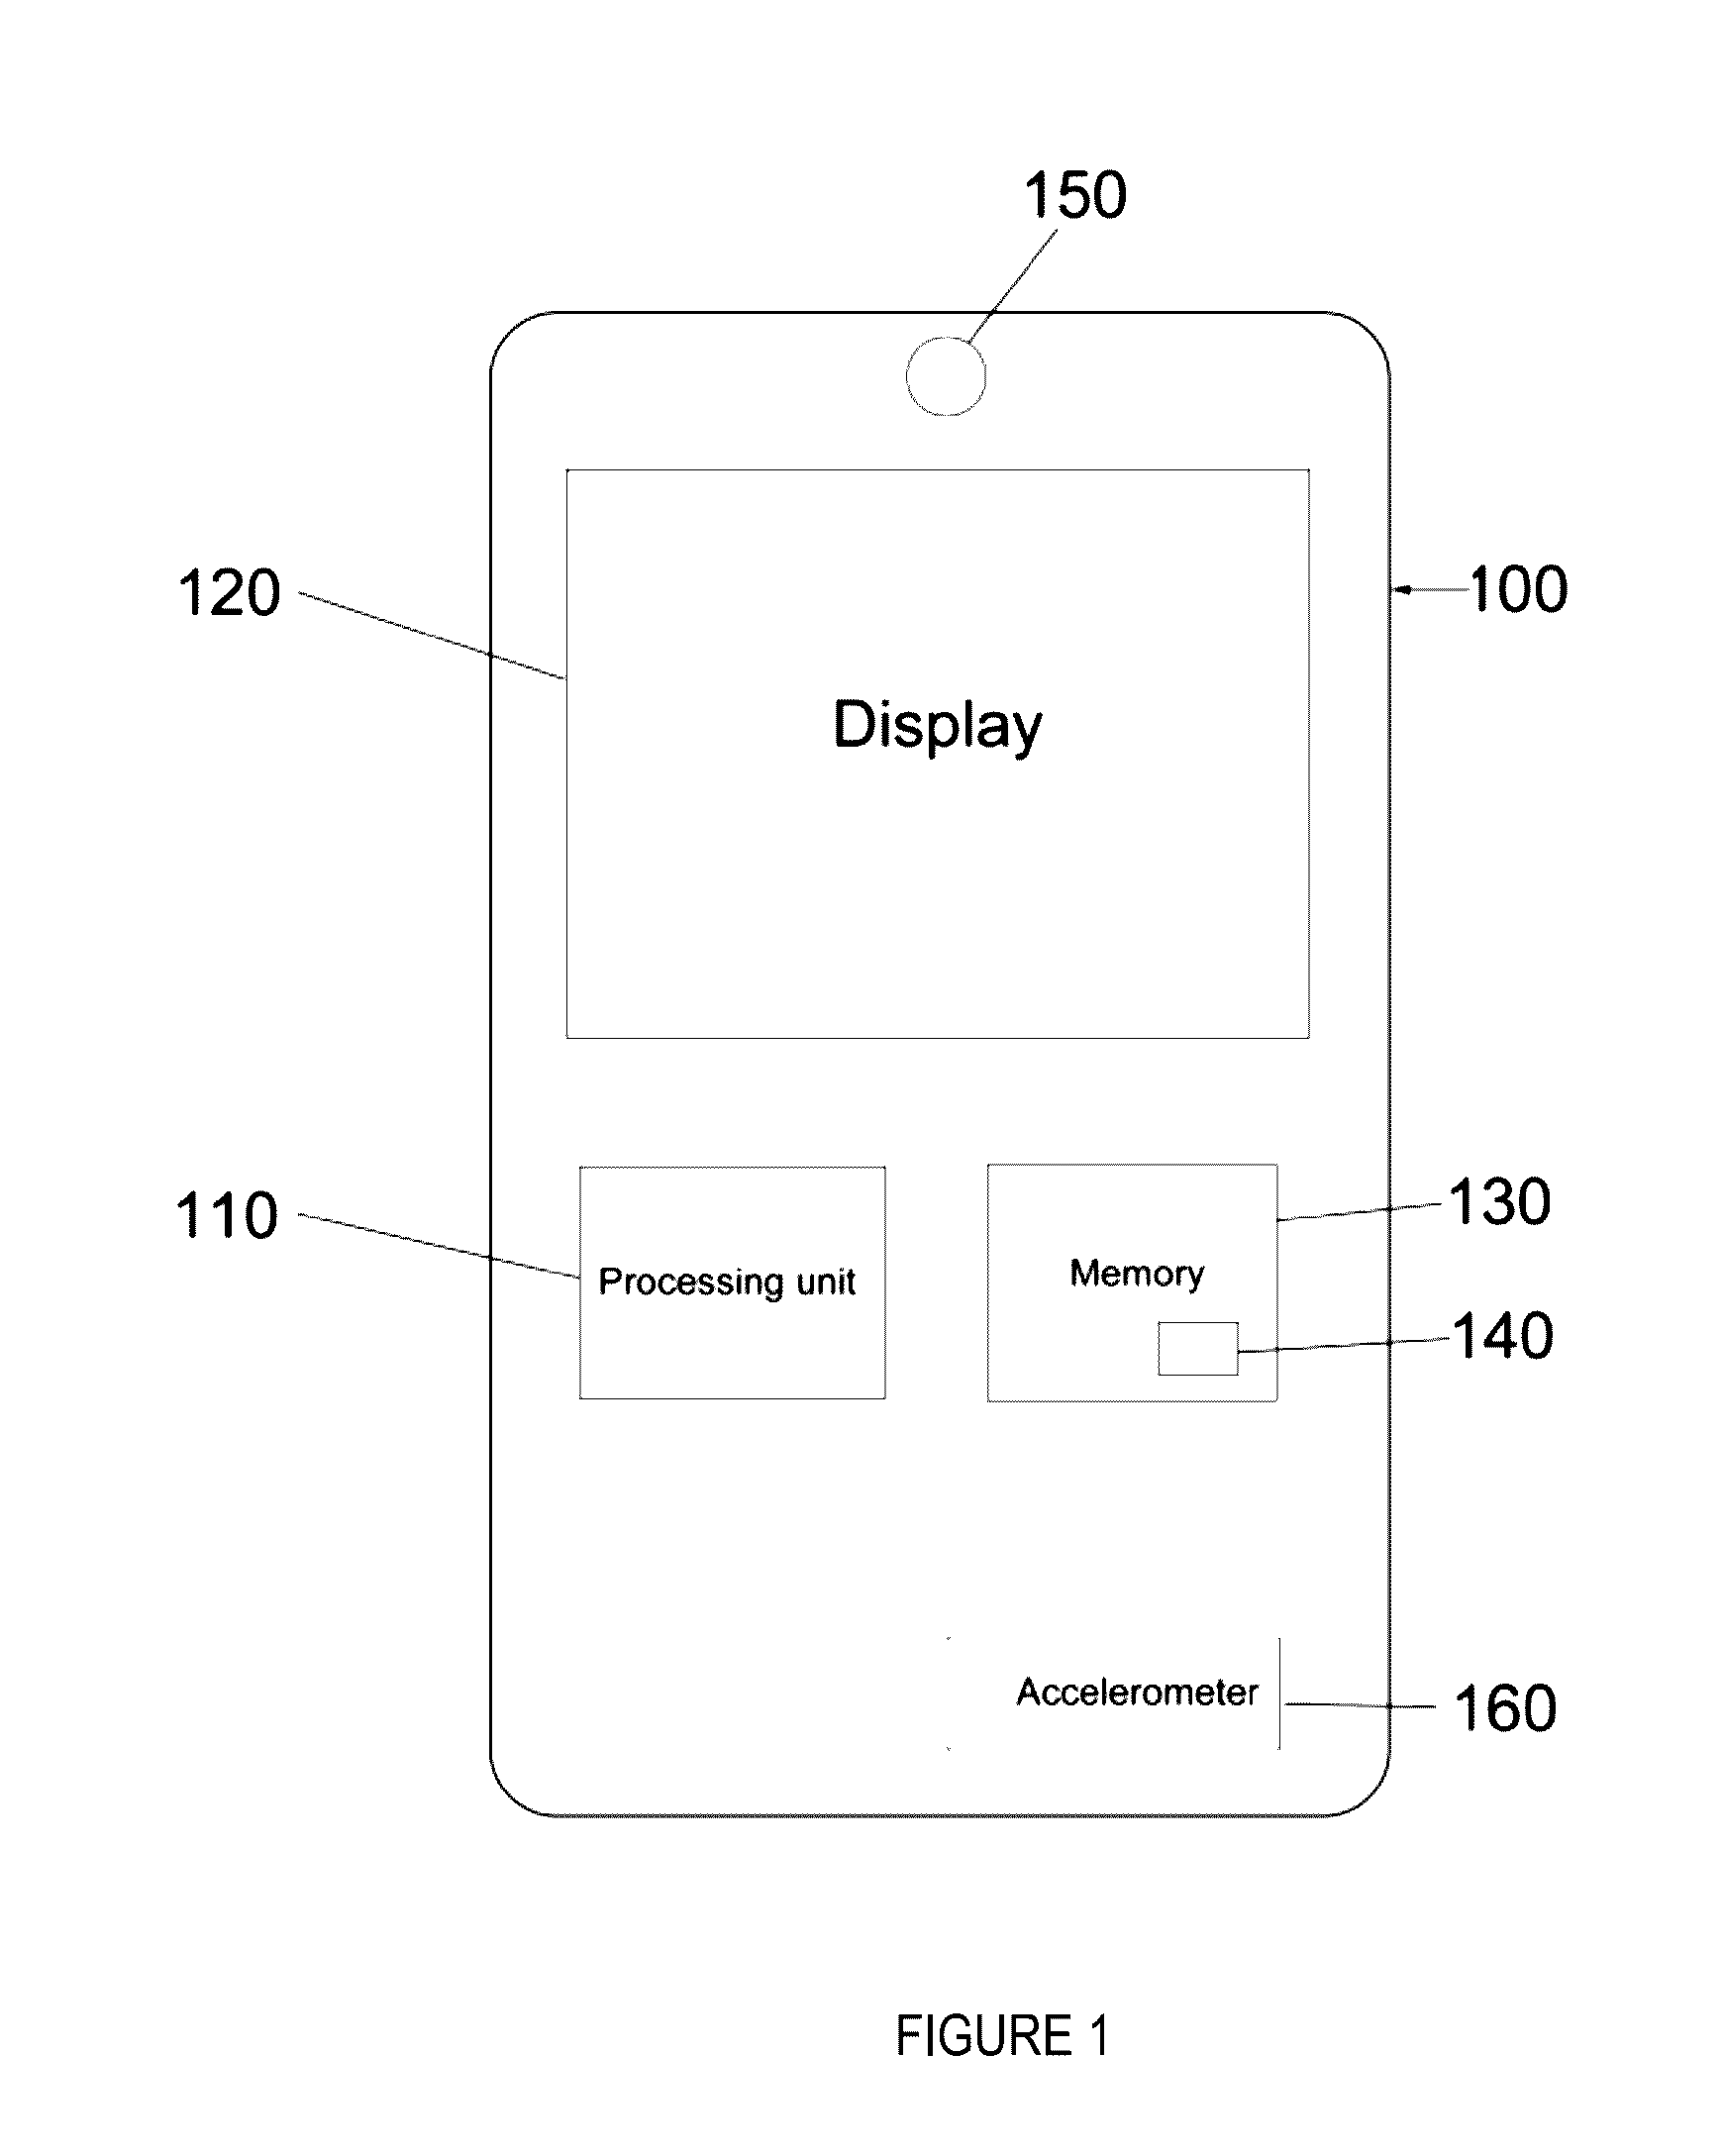 Vision correction system, method and graphical user interface for implementation on electronic devices having a graphical display